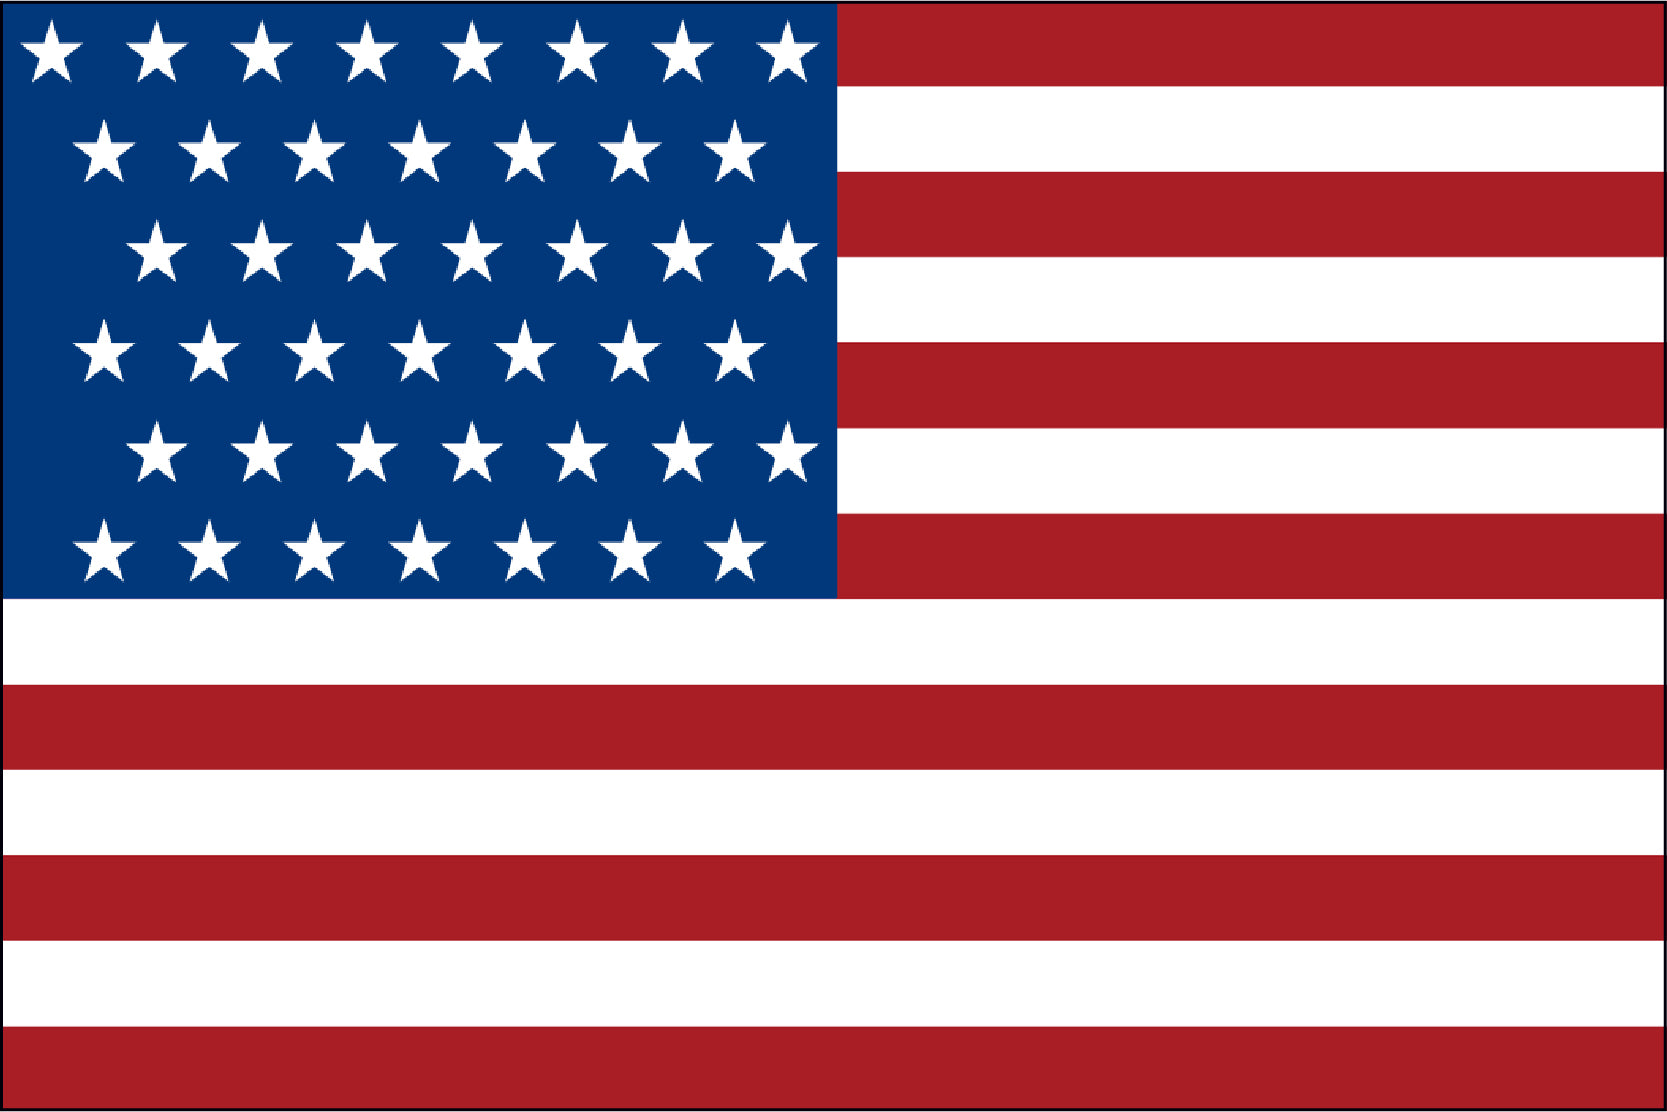 43 Star Old Glory Flag - LEAD TIMES ARE CURRENTLY RUNNING 6-8 WEEKS